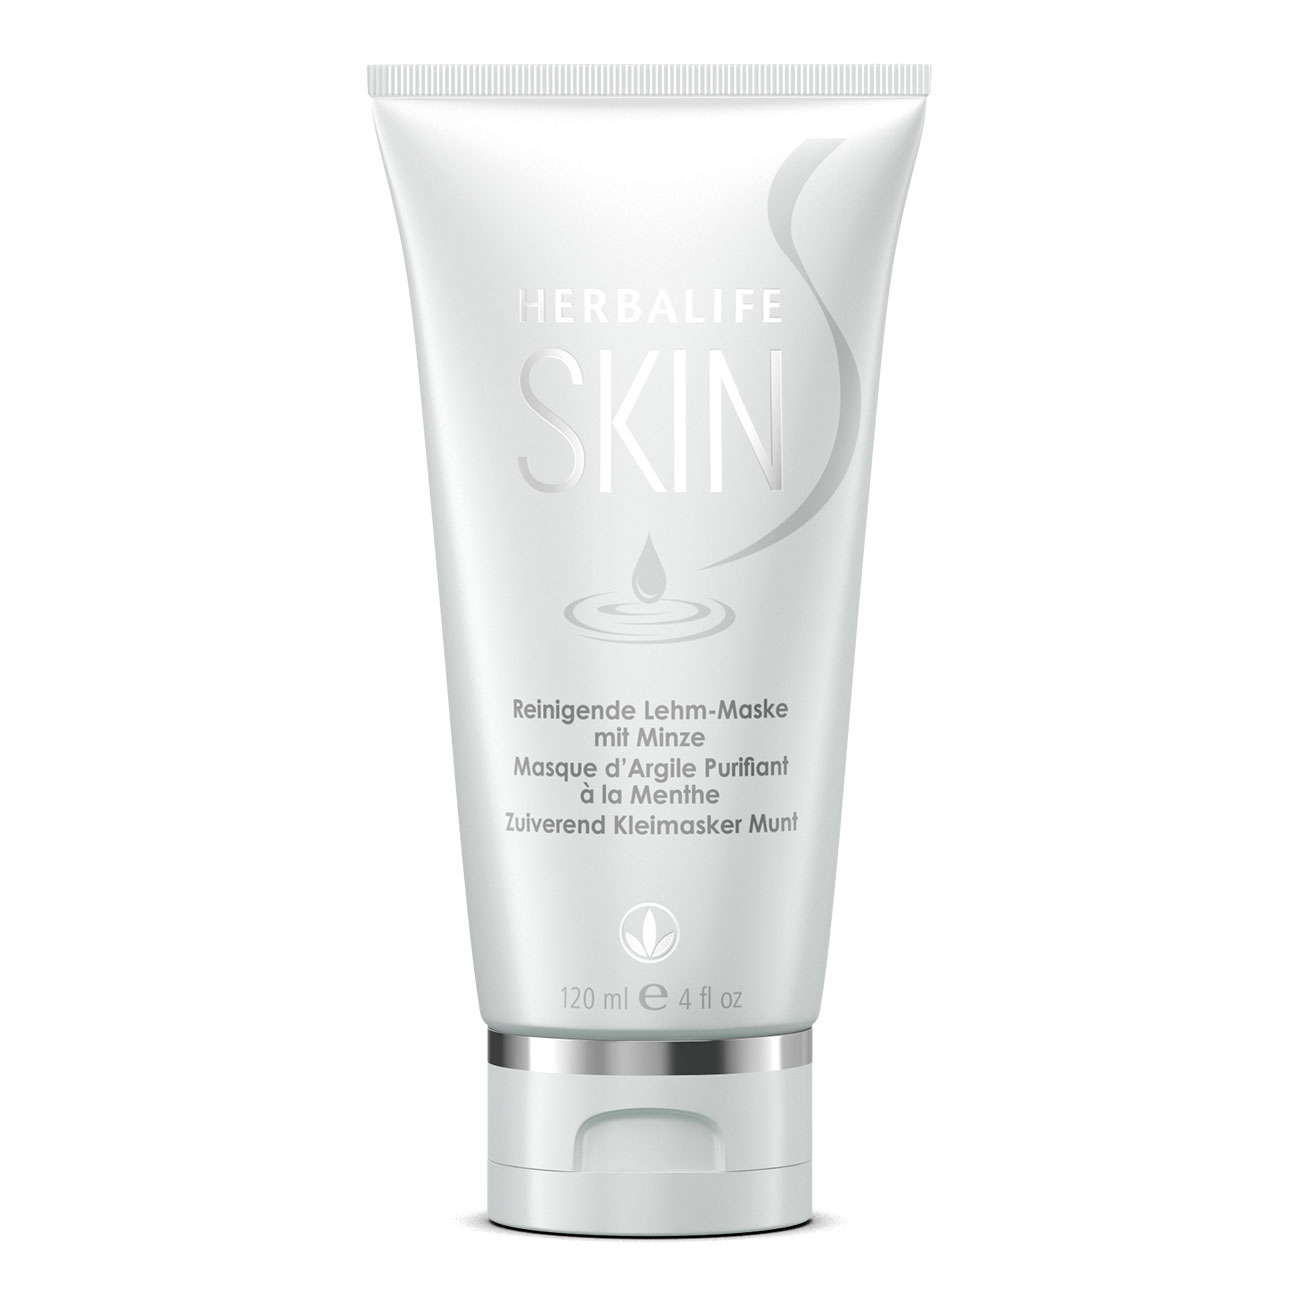 Herbalife SKIN Purifying Mint Clay Mask